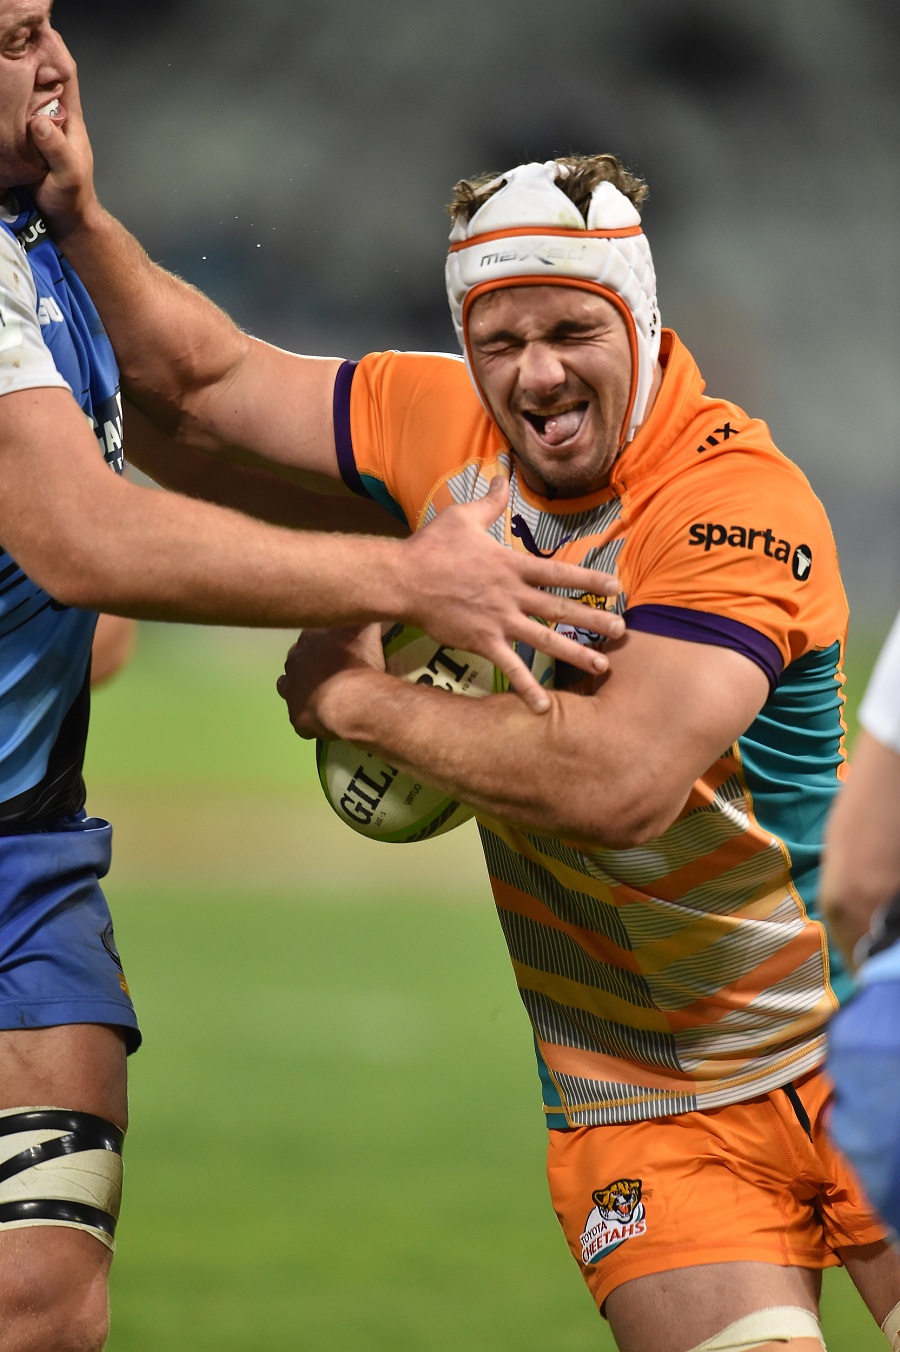 The Cheetahs' Heinrich Brussow prepares to take a hit, Toyota Cheetahs v Western Force, Super Rugby, Vodacom Park, May 10, 2014